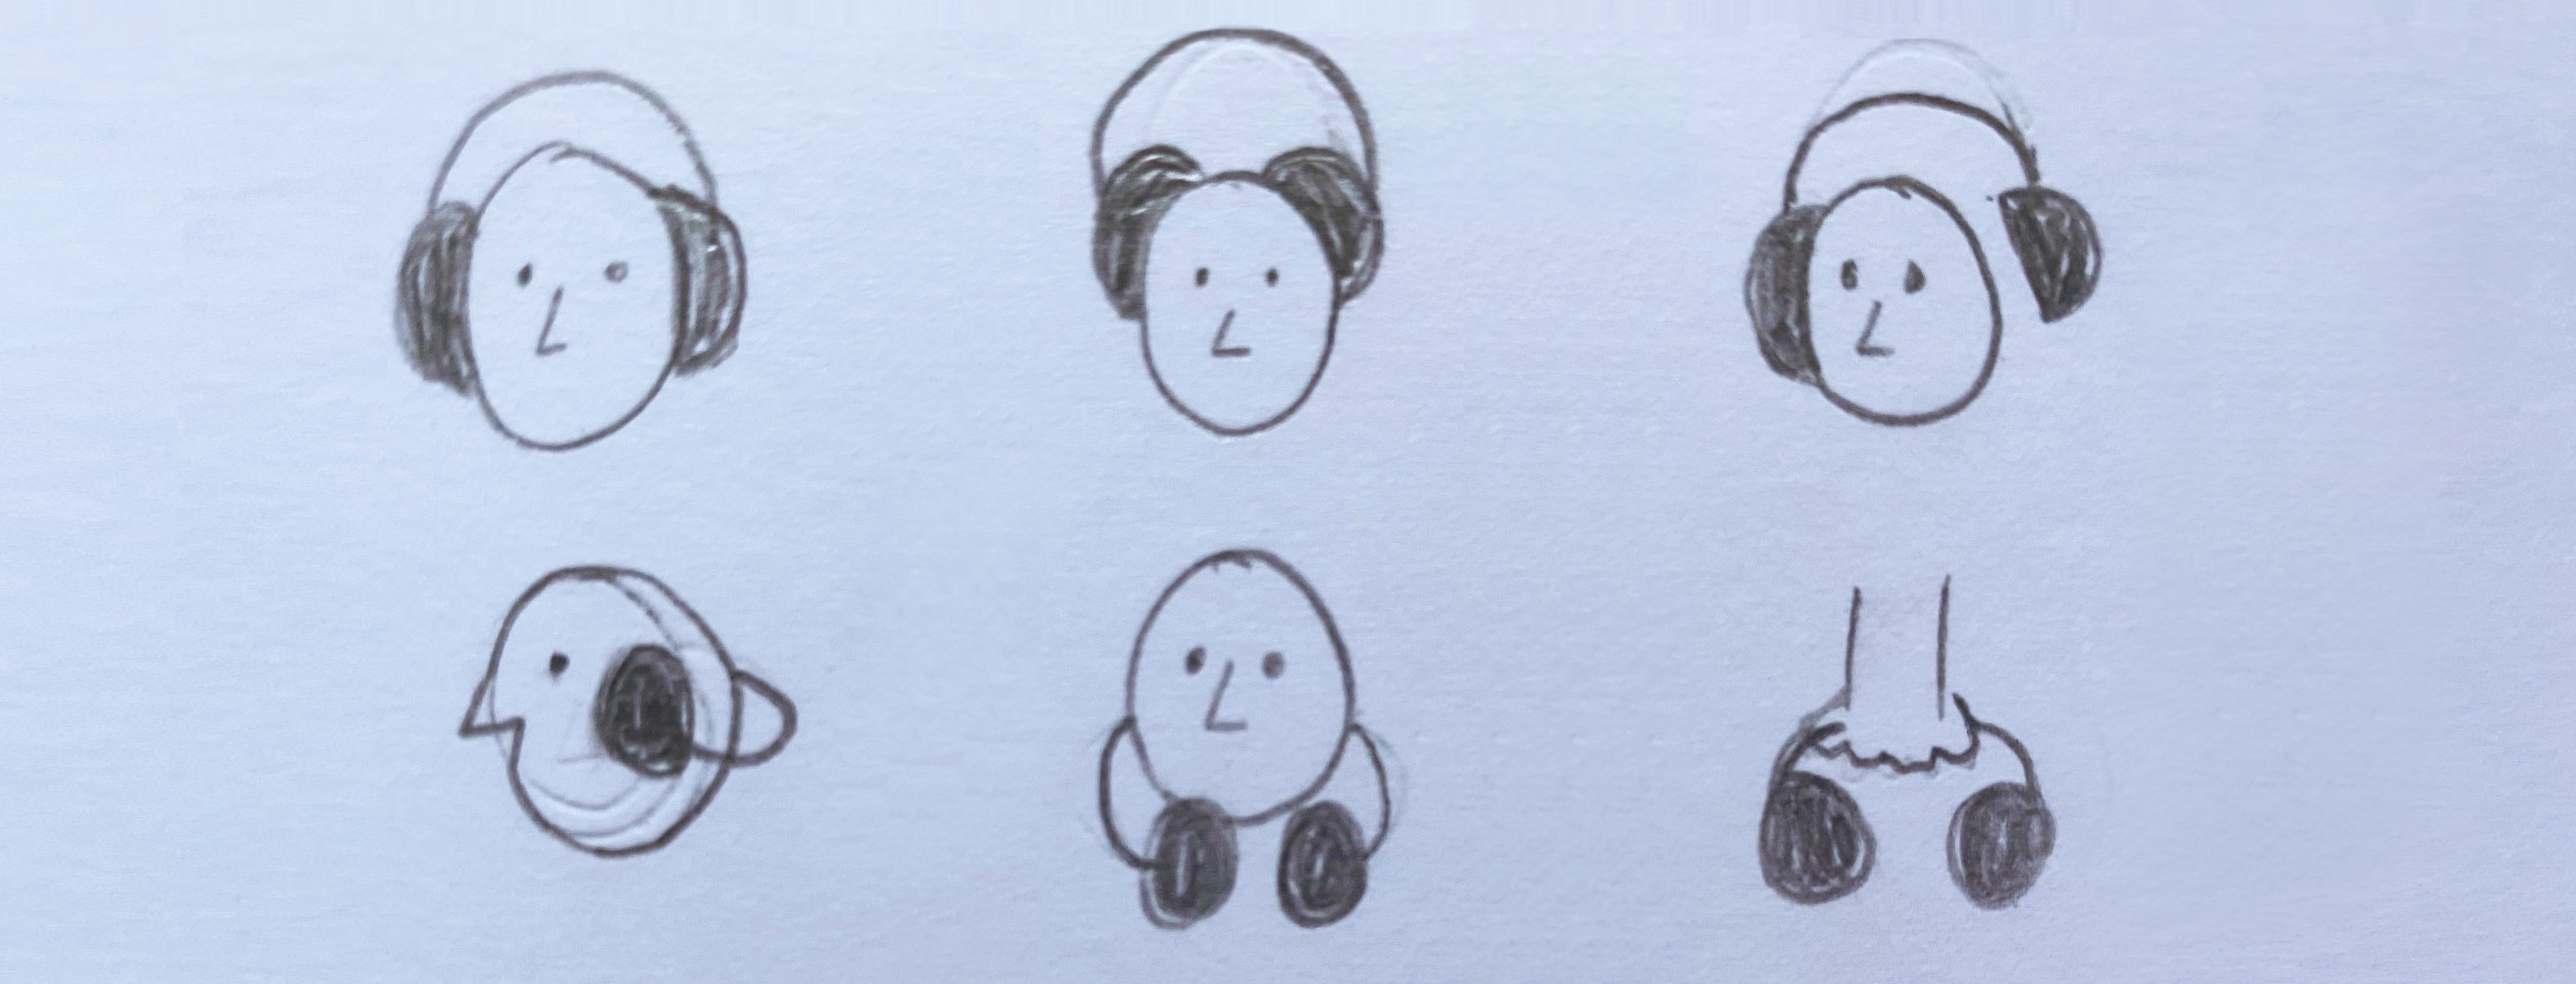 image of little people wearing headphones in different orientations